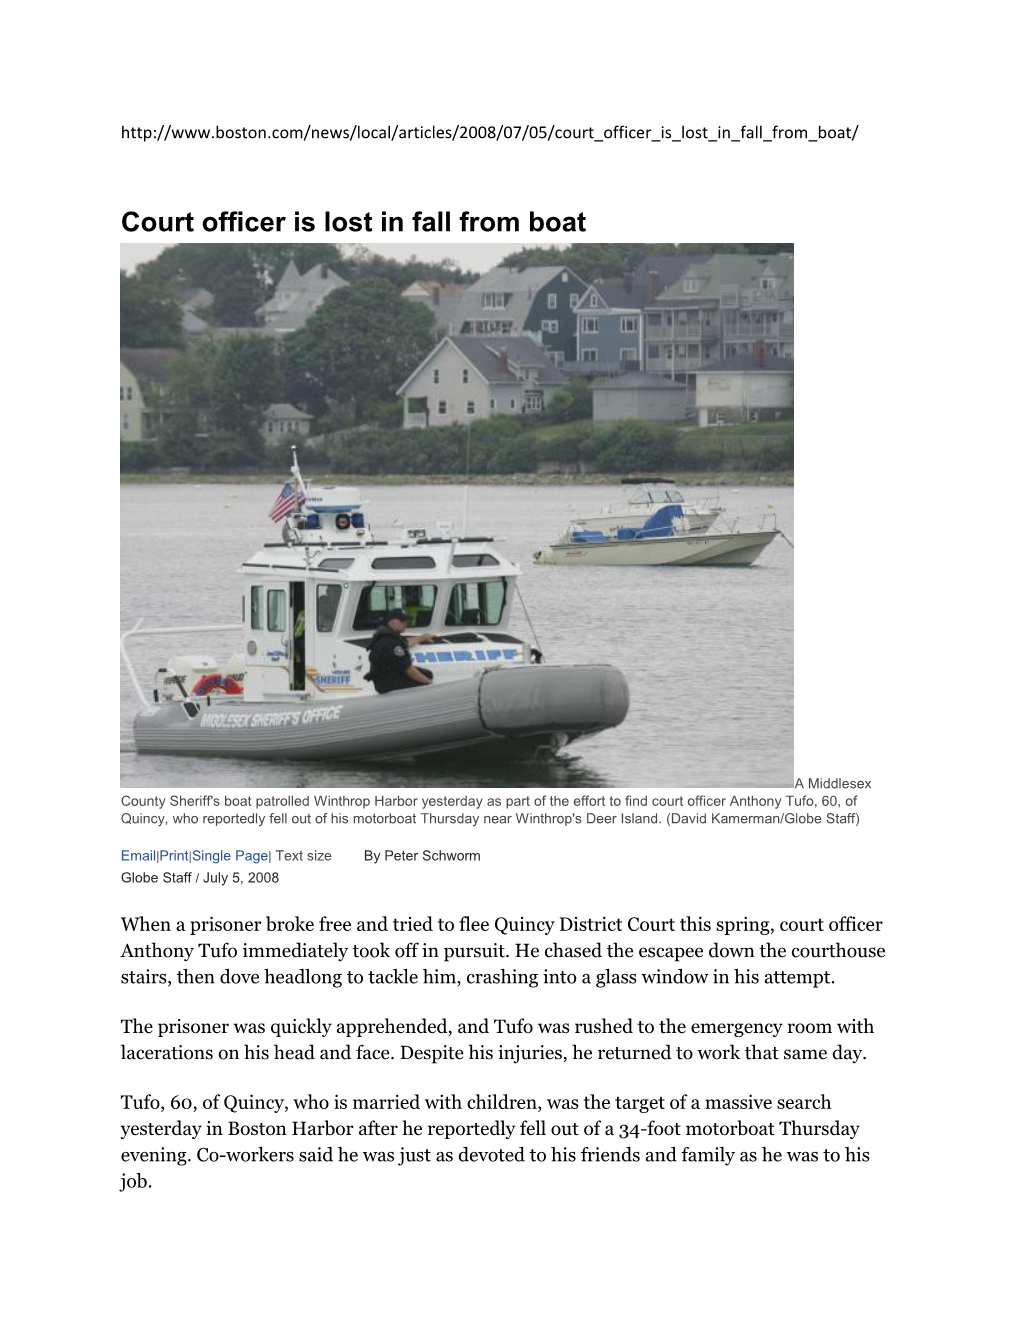 Court Officer Is Lost in Fall from Boat